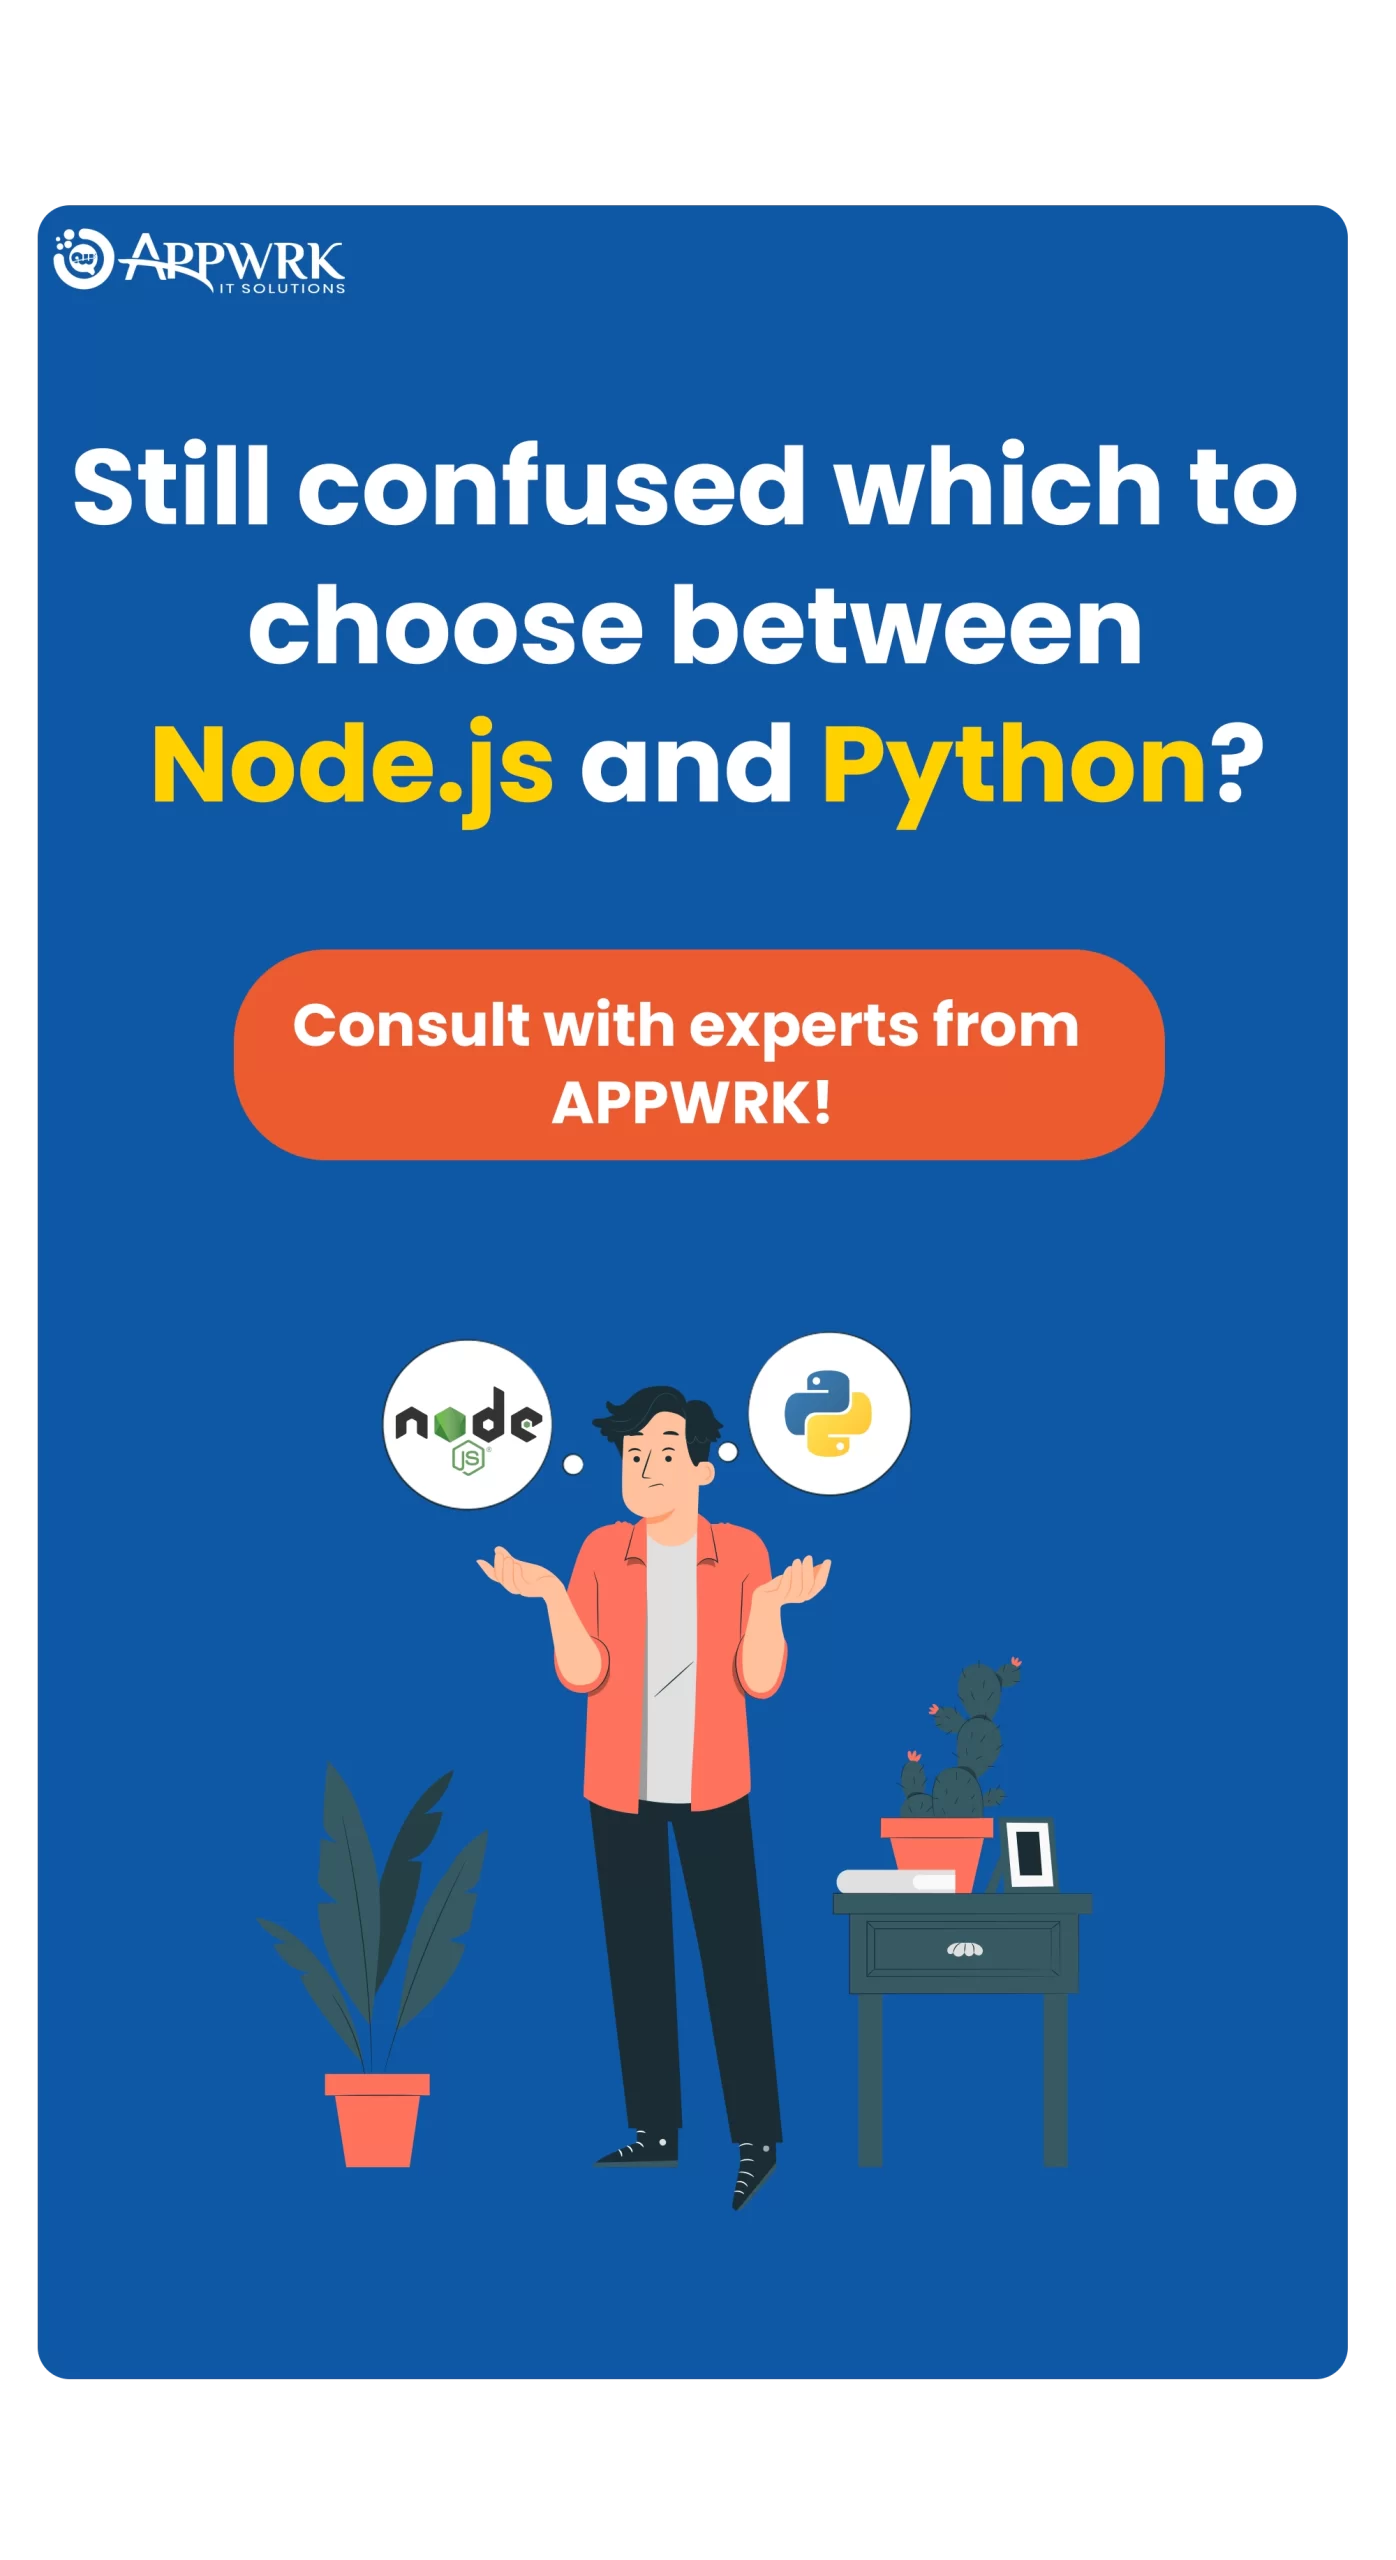 Still confused which to choose between Node.js and Python?